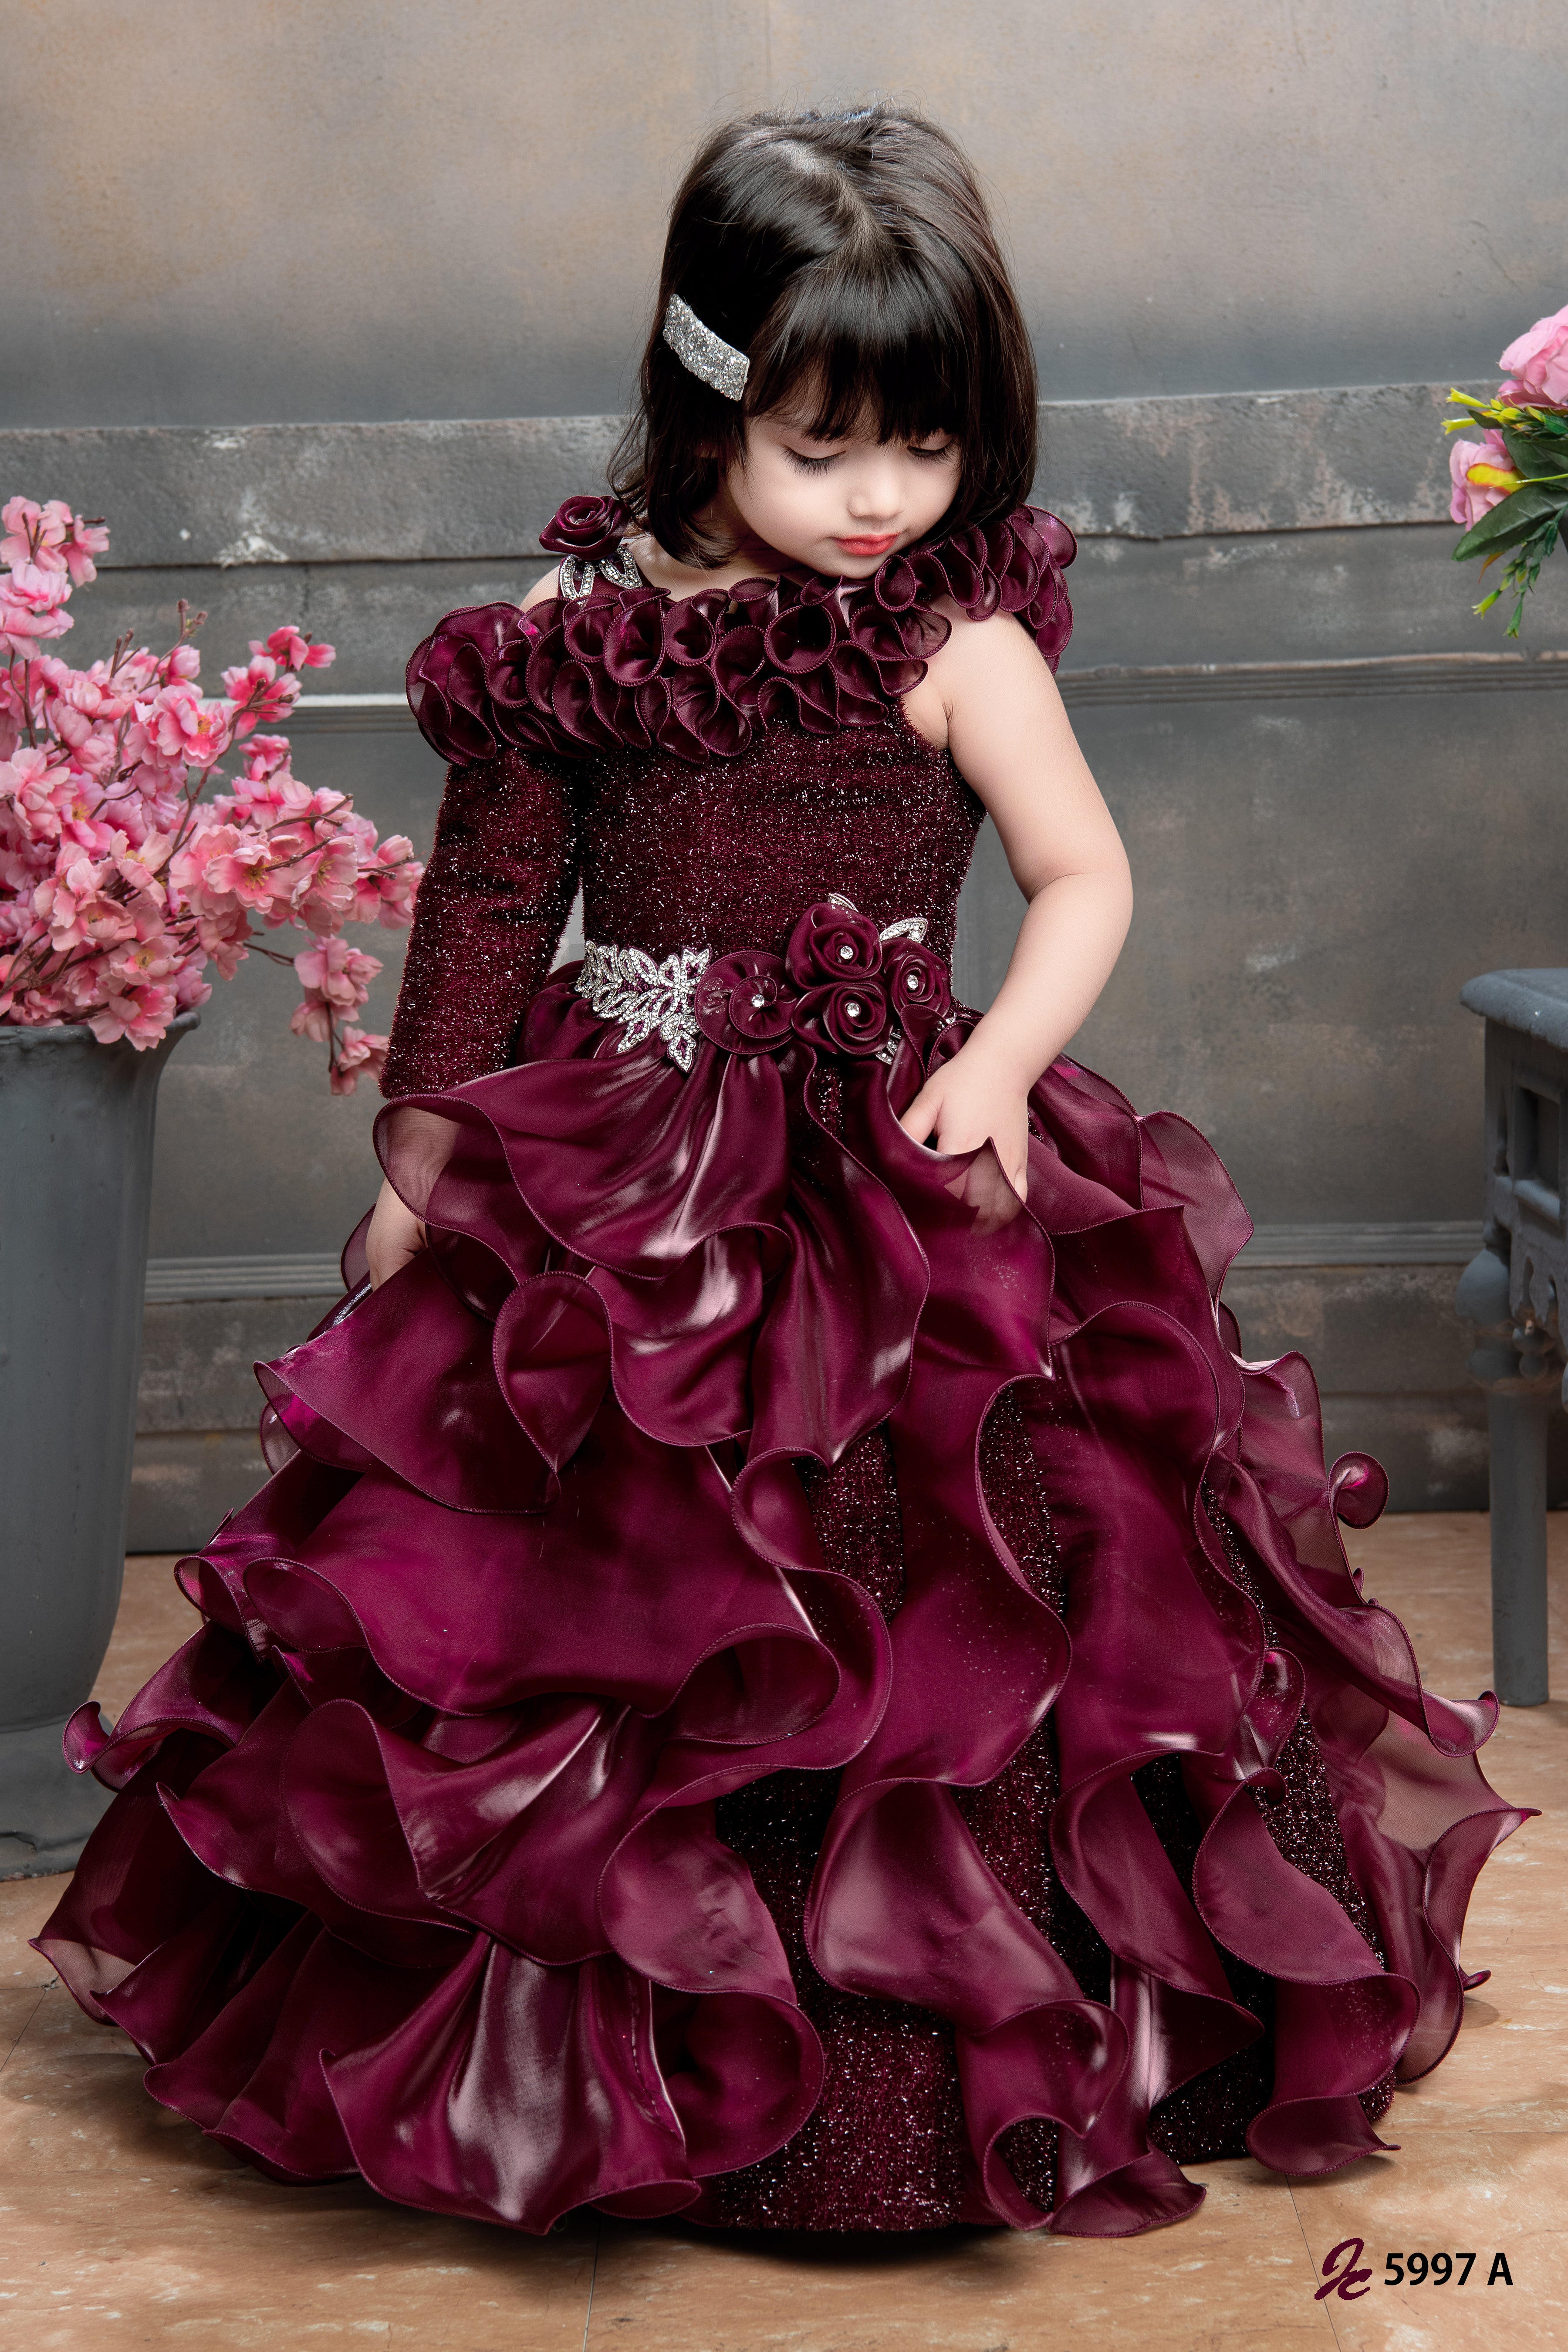 2021 O-neck Ball Gowns Burgundy Wedding Dress With Color 3d Flowers  Applique With Rhinestones Crystals Bridal Gowns Reals - Wedding Dresses -  AliExpress